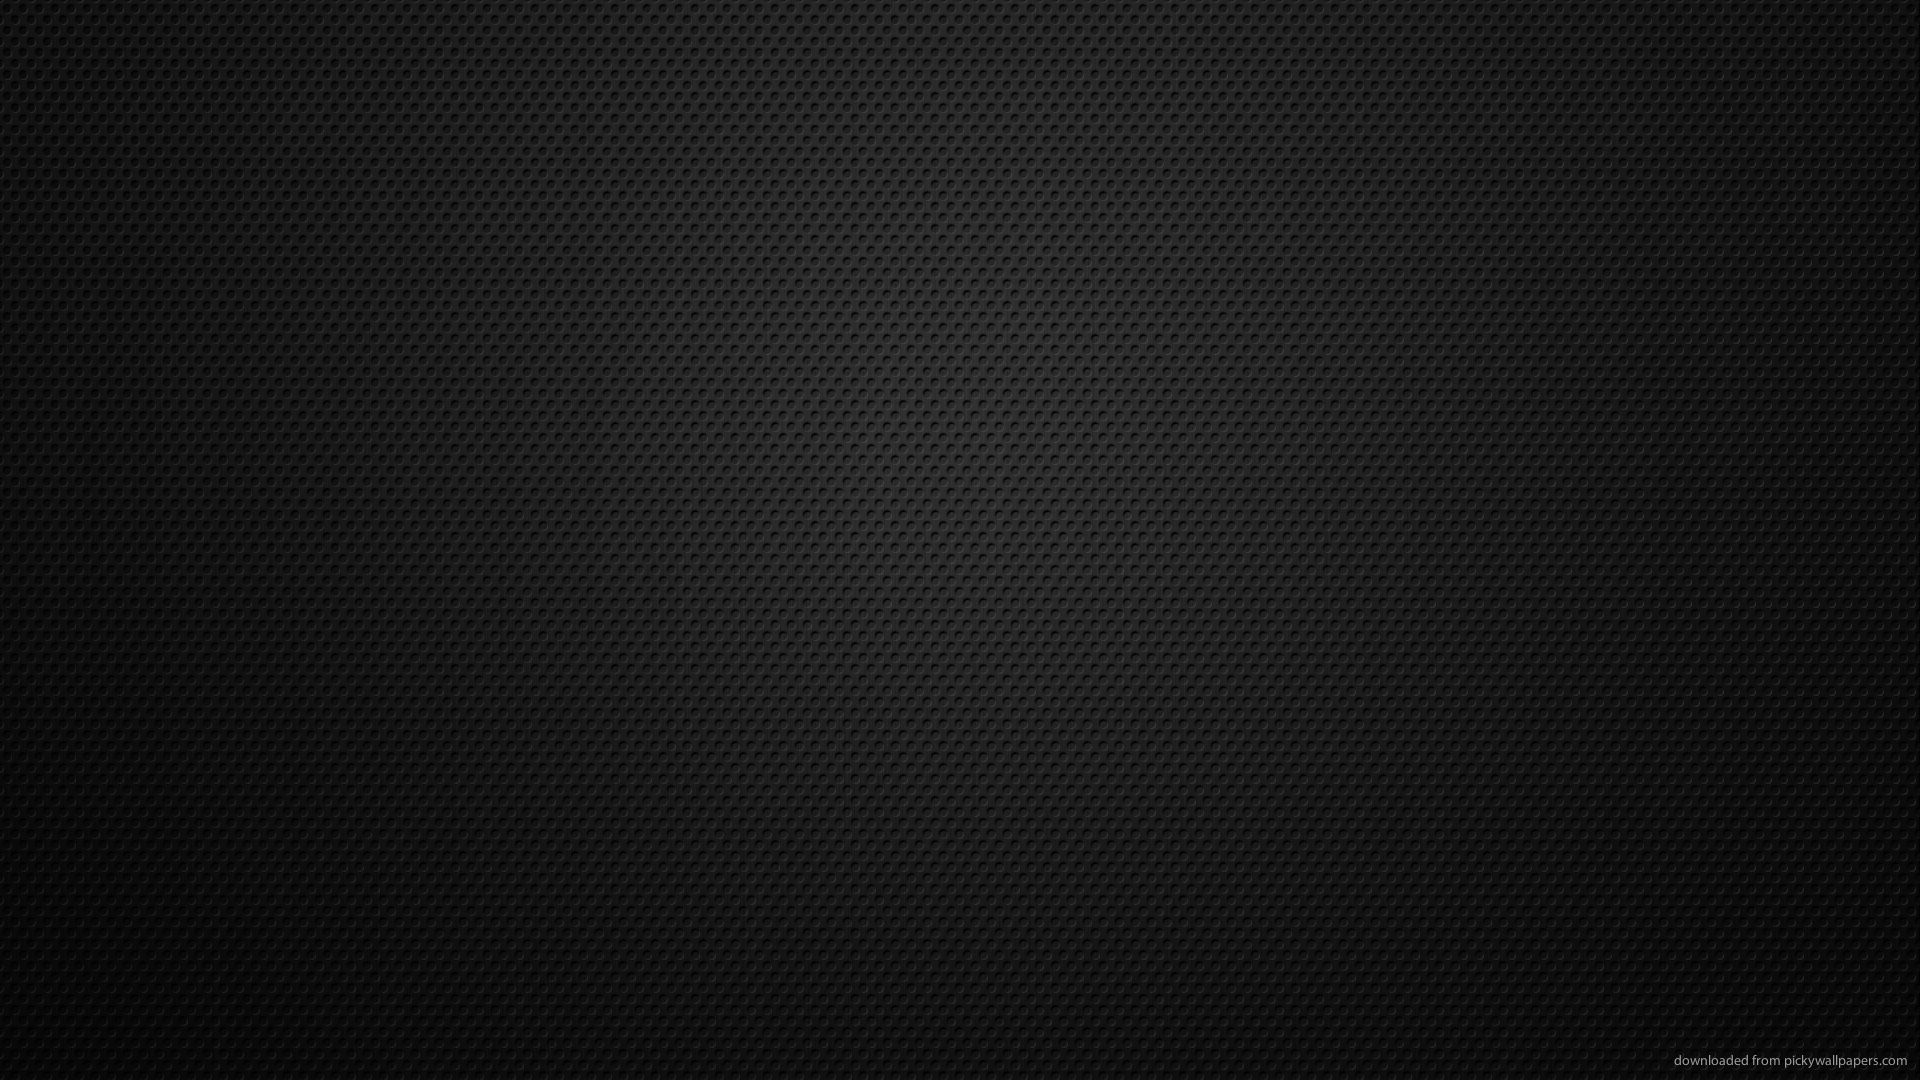 19x1080 Black Wallpapers Group 86